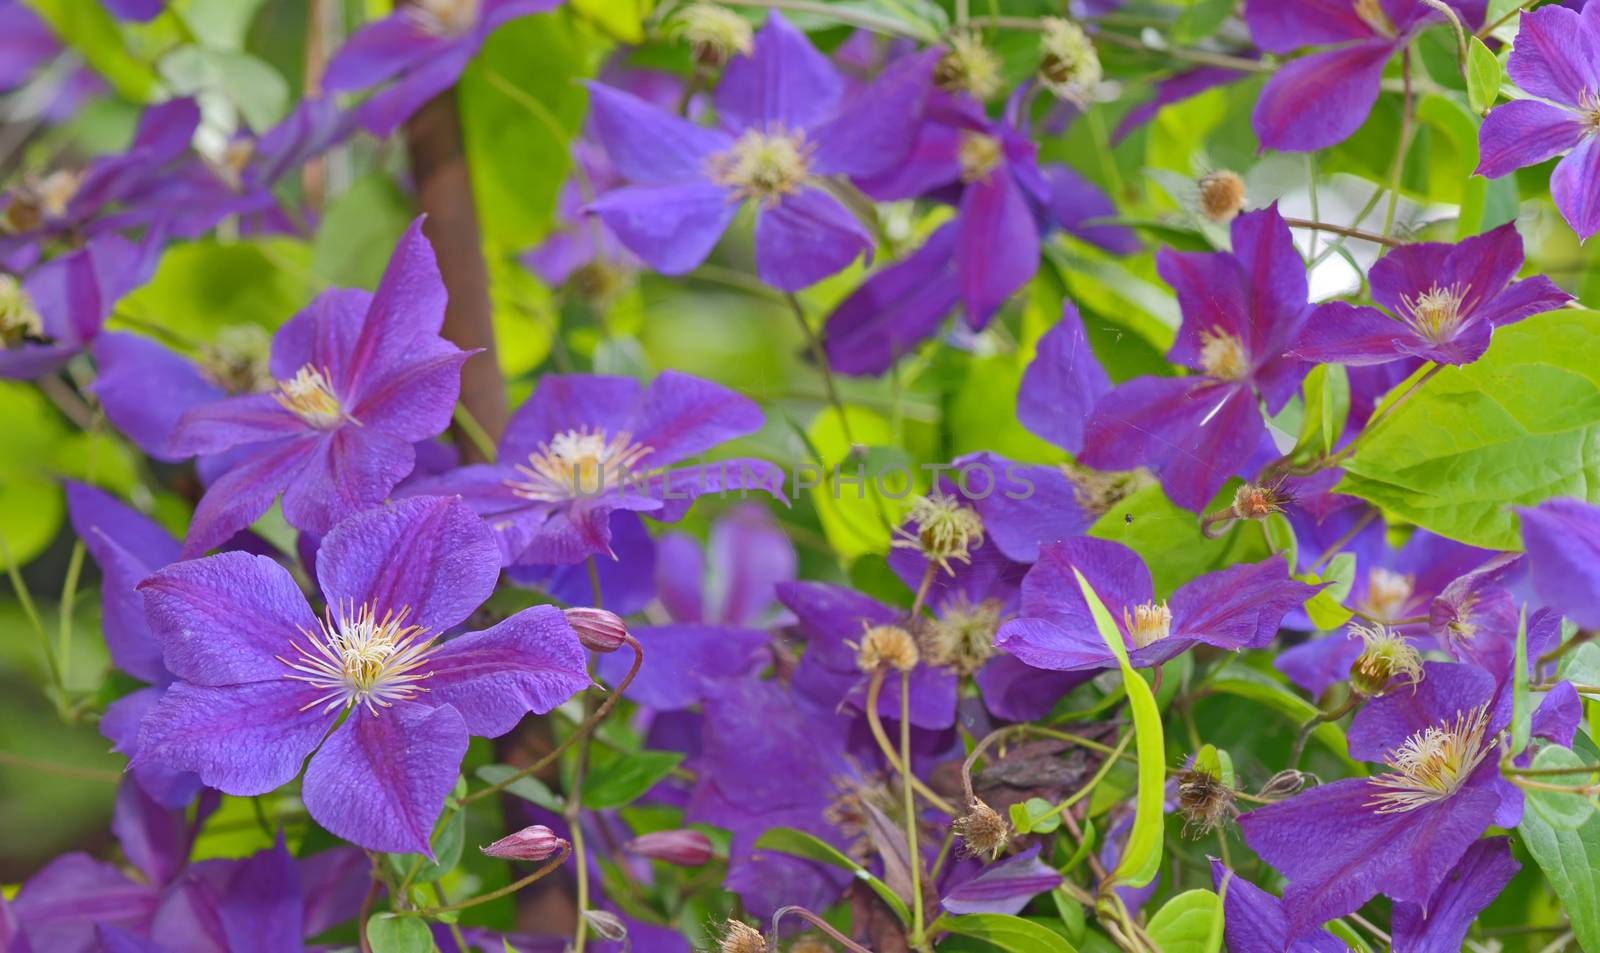 Clematis flower on a fence in garden